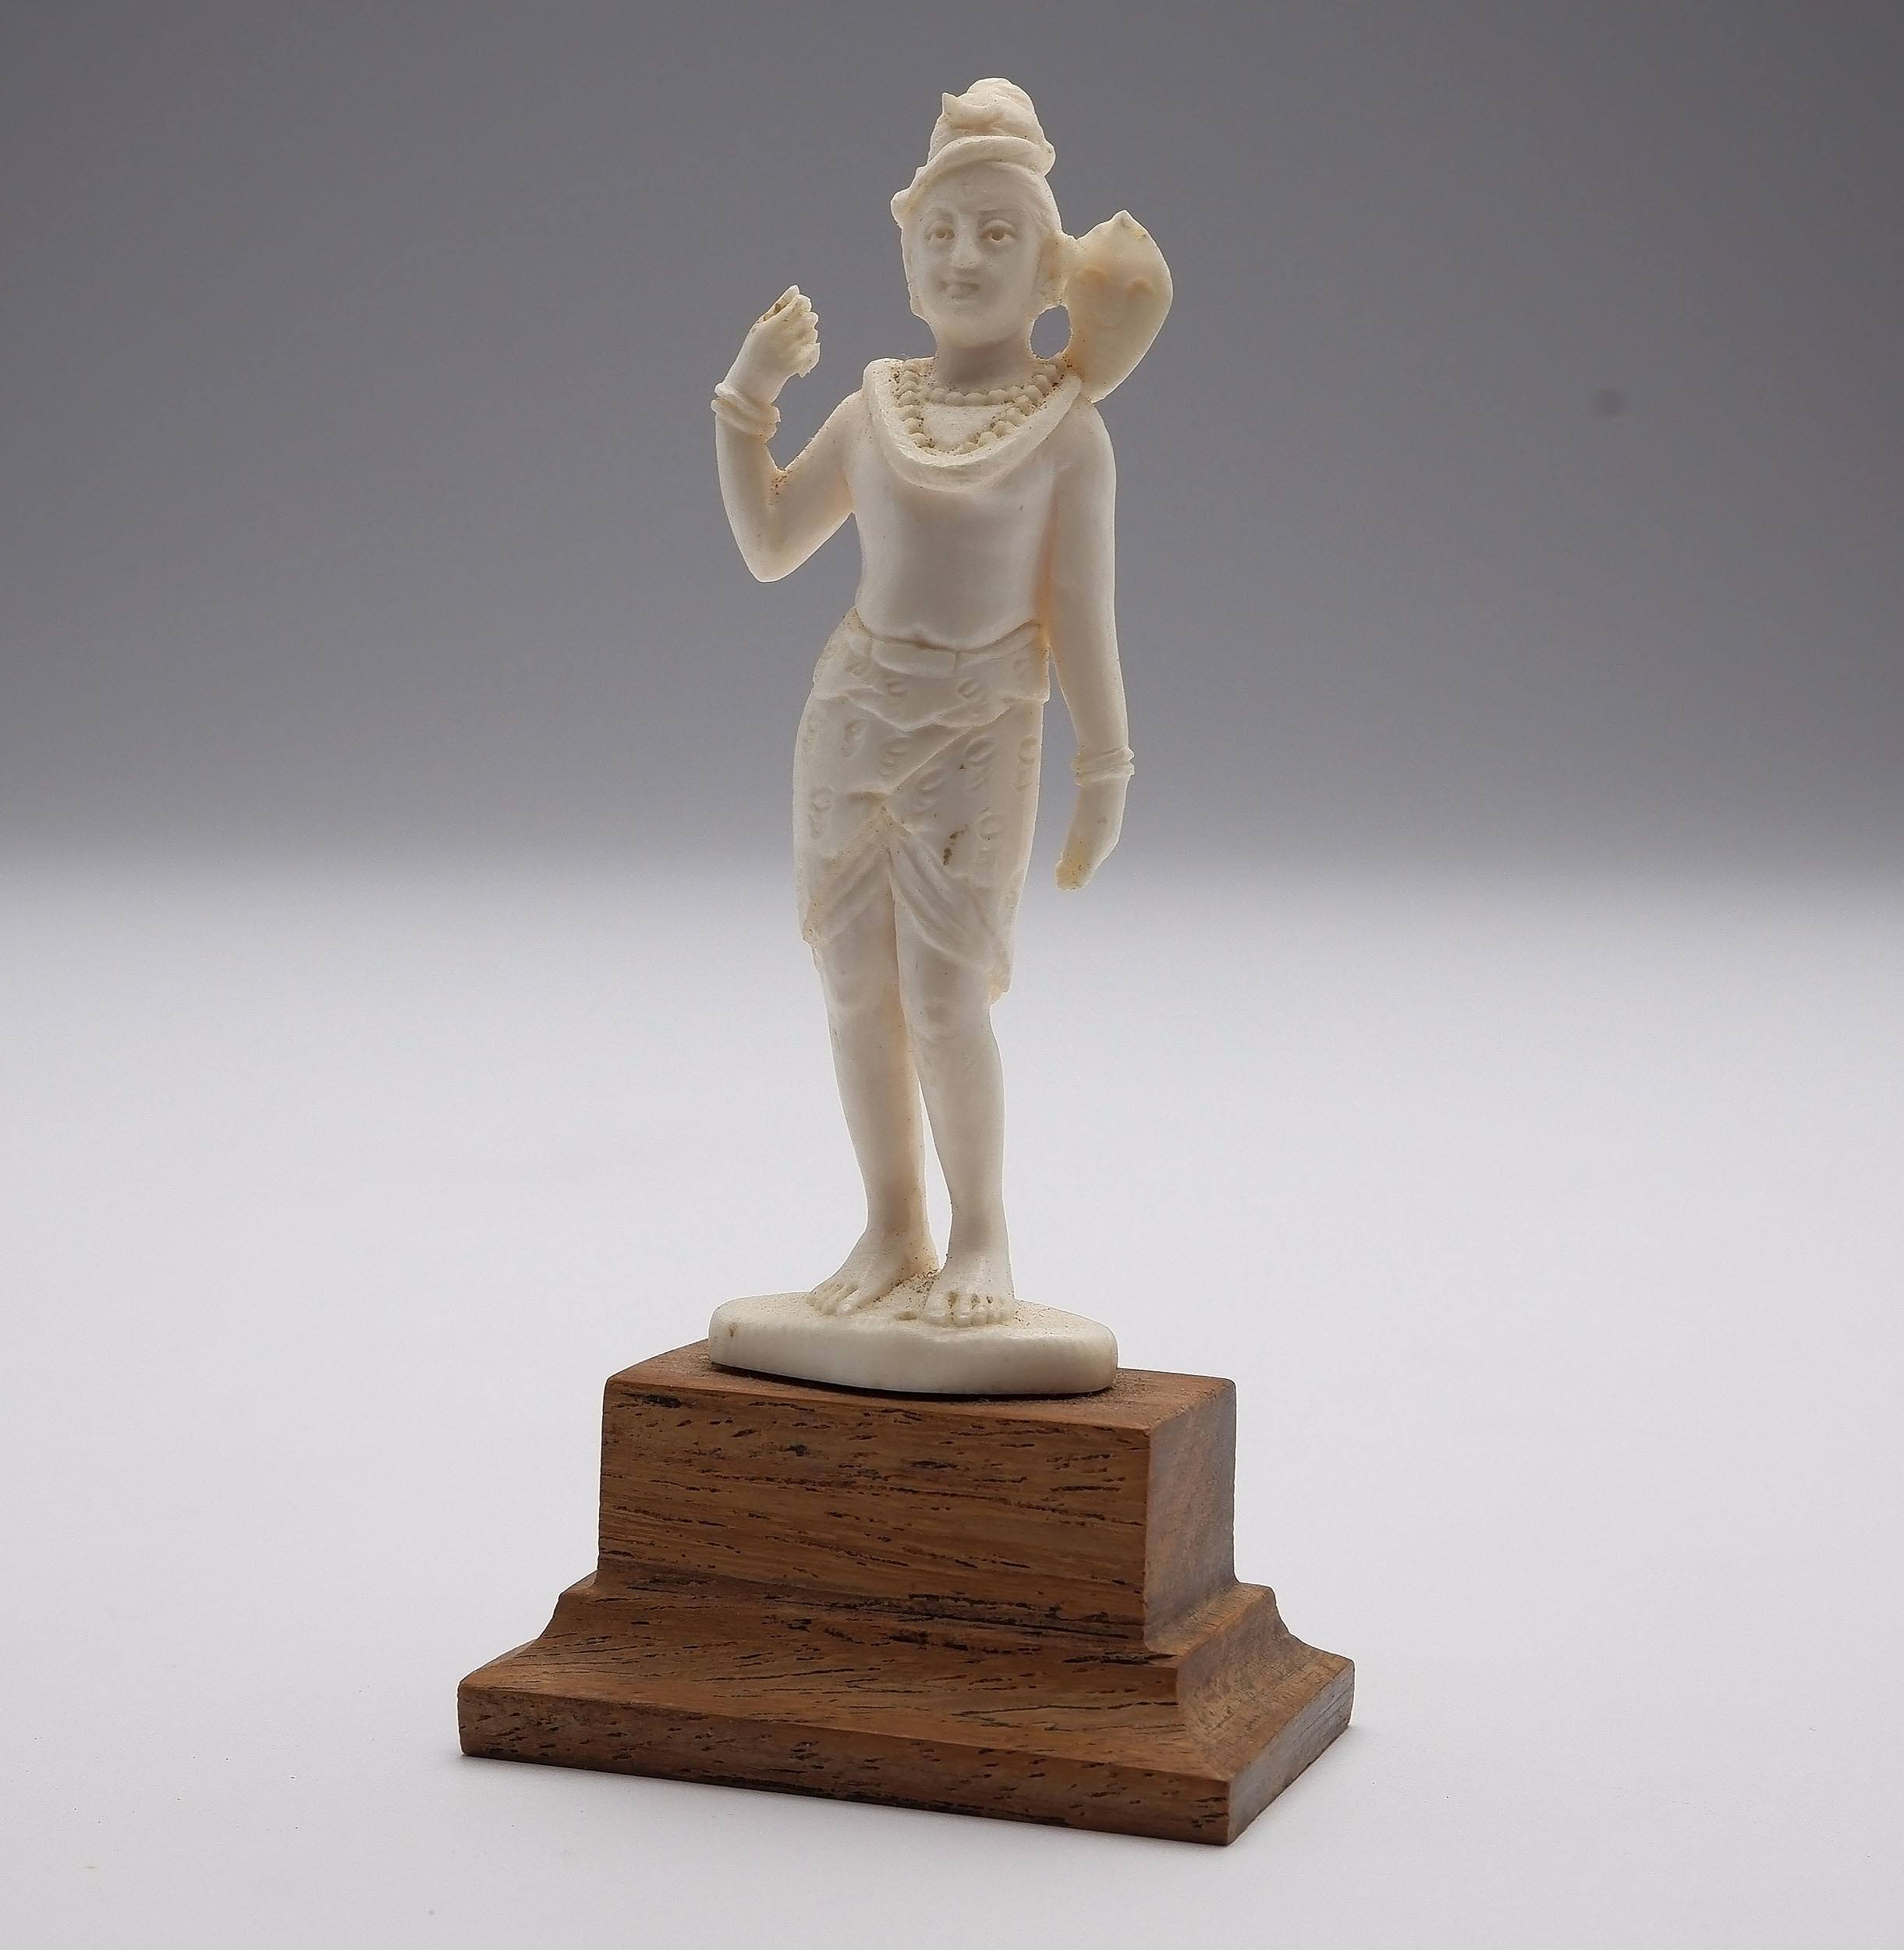 'Indian Carved Ivory Figure of a Snake Charmer, Early to Mid 20th Century'